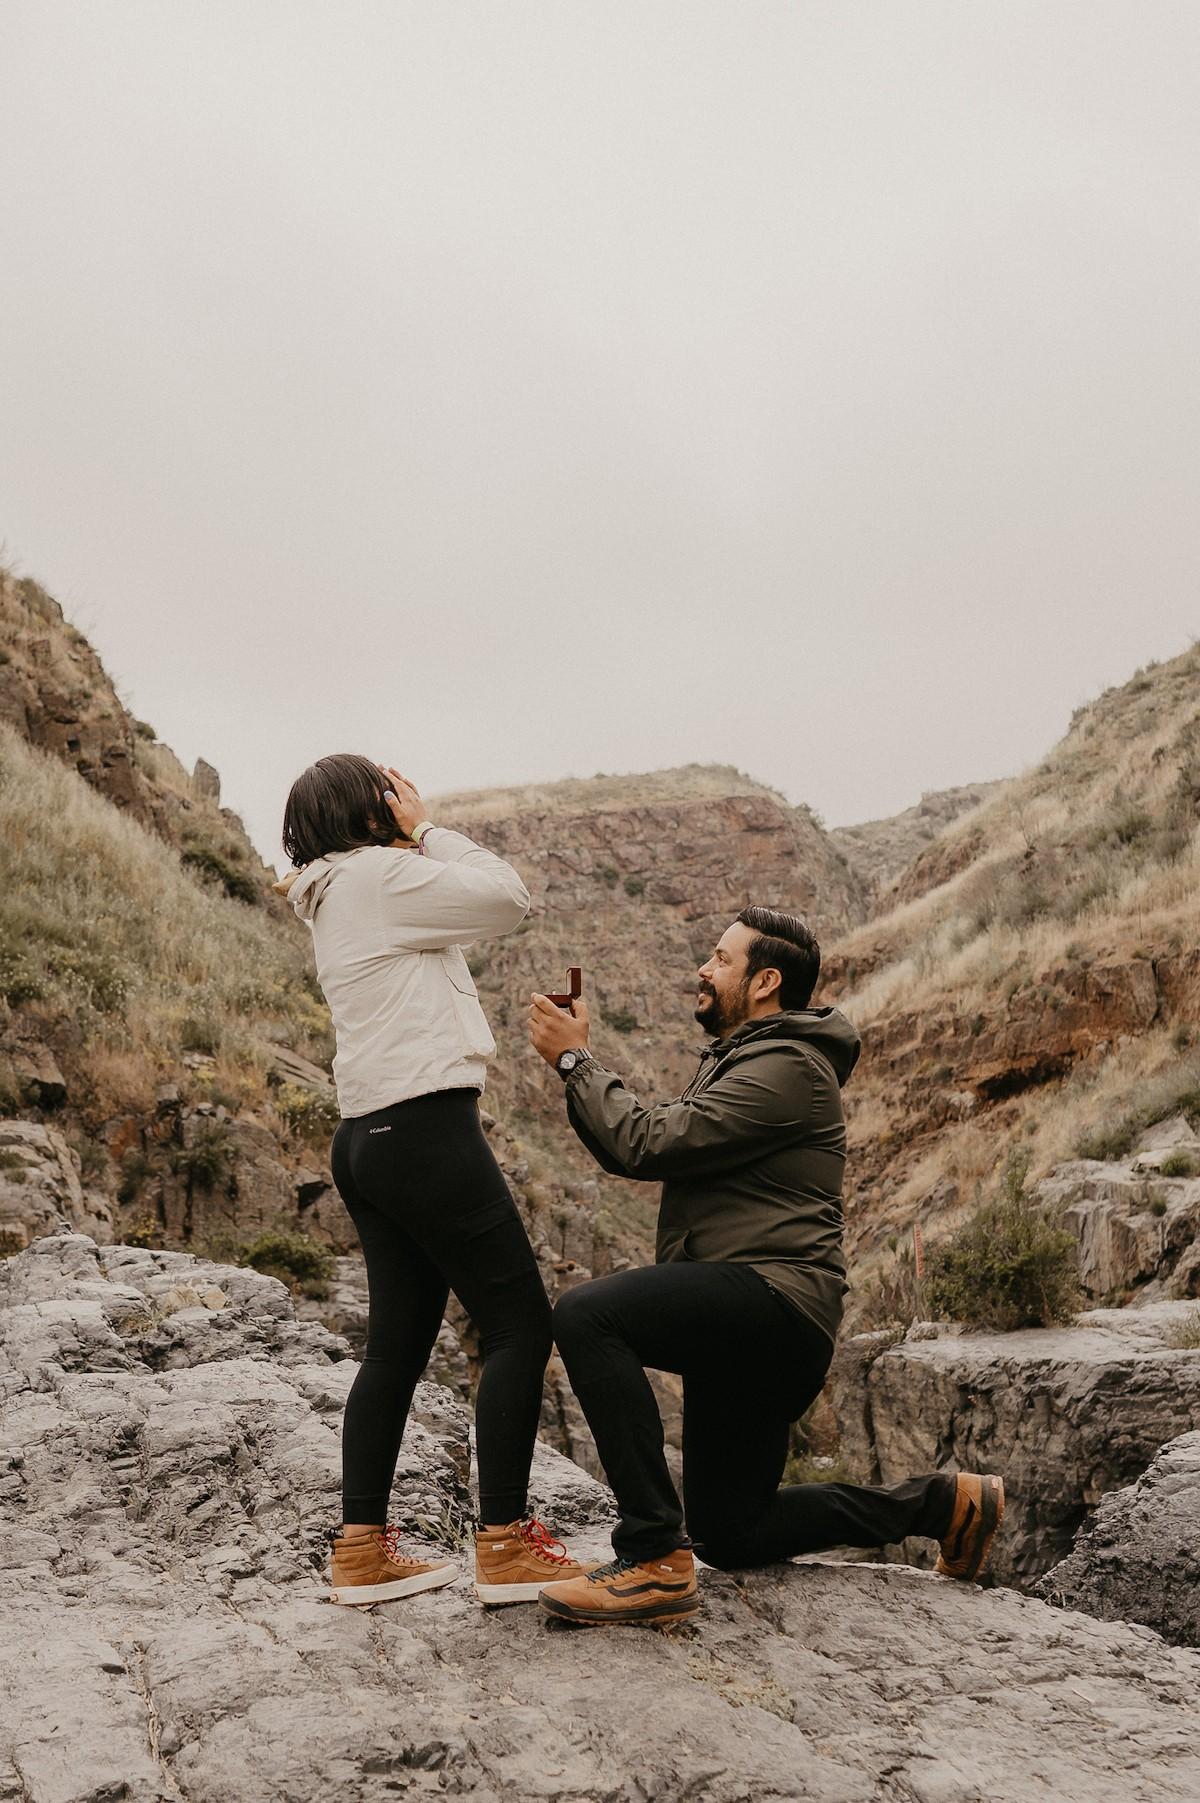 BEHIND THE SCENES OF A SURPRISE ENGAGEMENT PROPOSAL: A PHOTOGRAPHER'S TALE